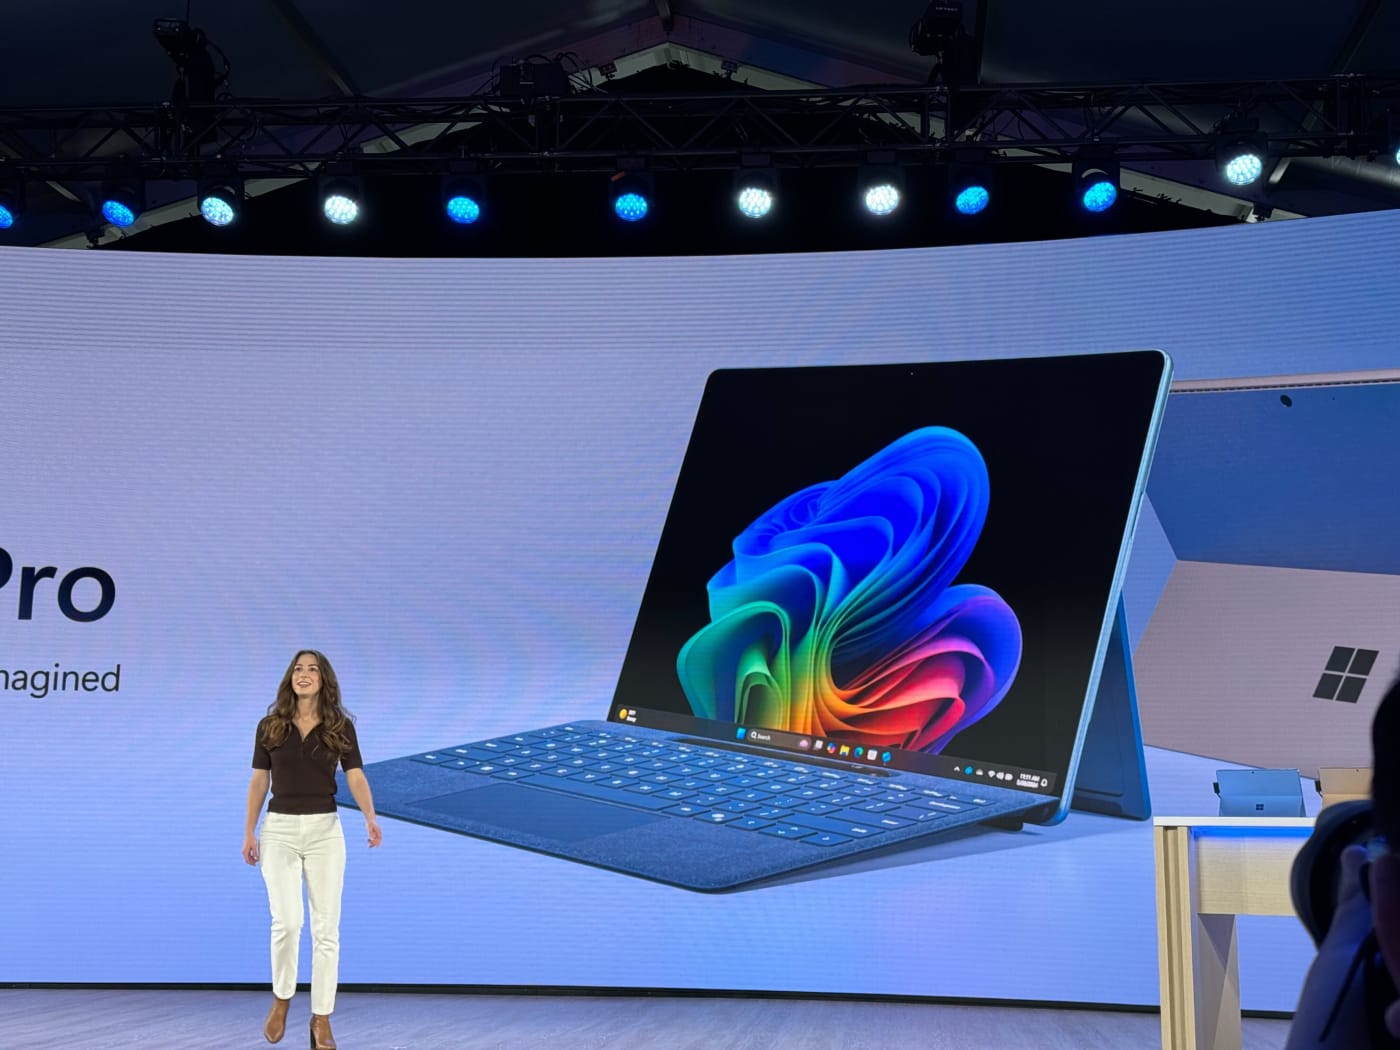 Microsoft's new Copilot+ Surface Pro has an OLED screen and a redesigned keyboard